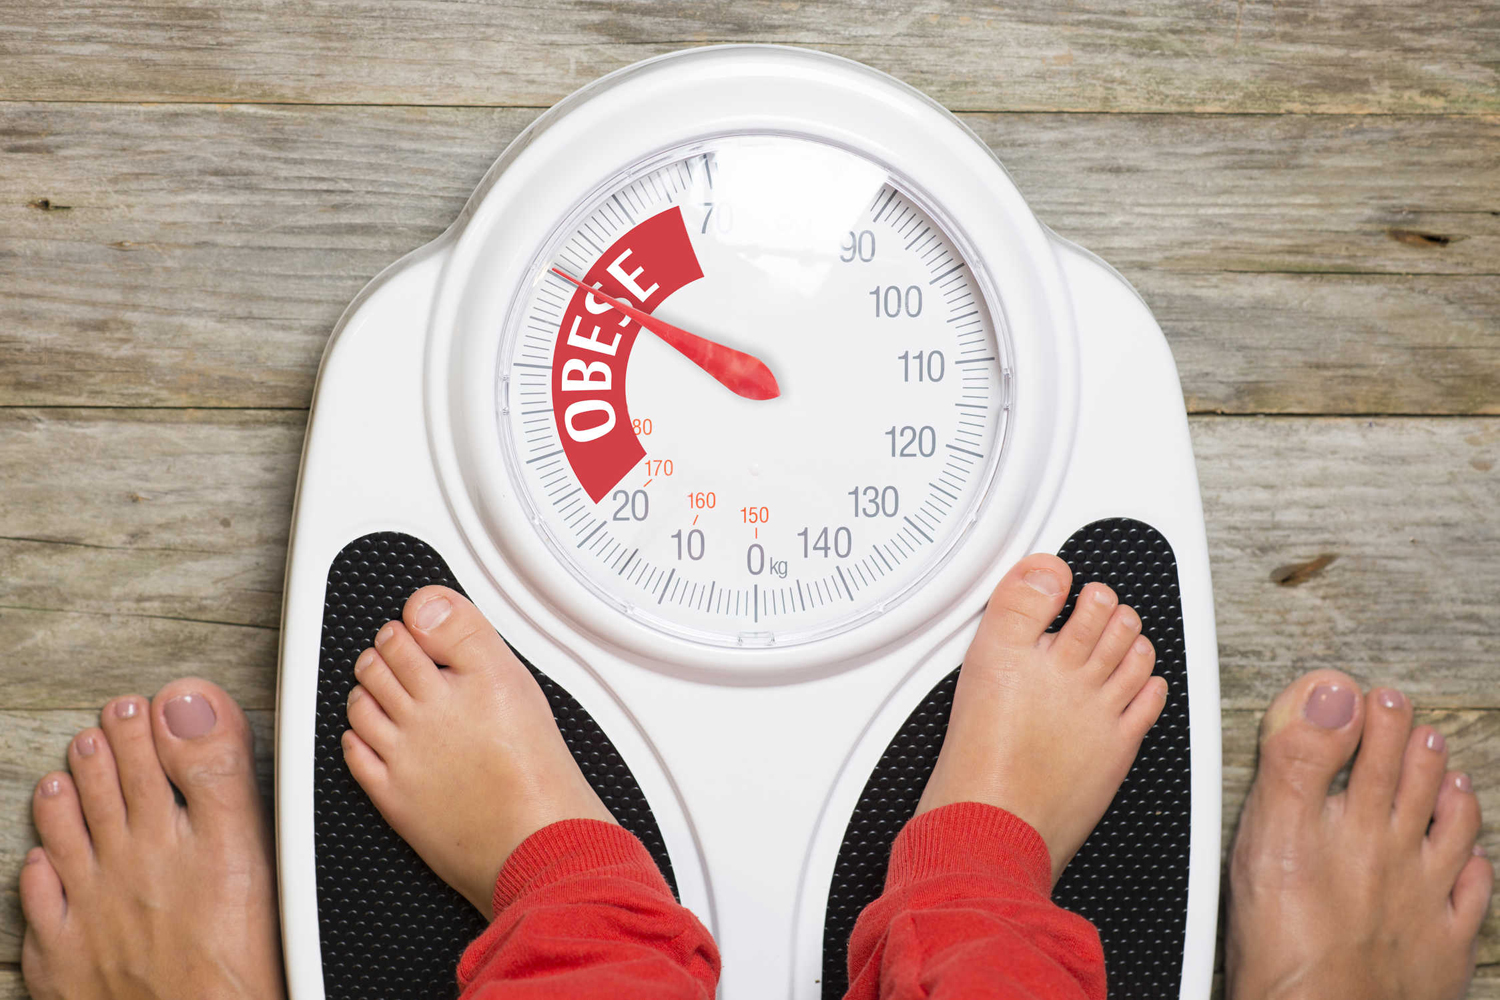 How to deal with childhood obesity in the UAE Kids